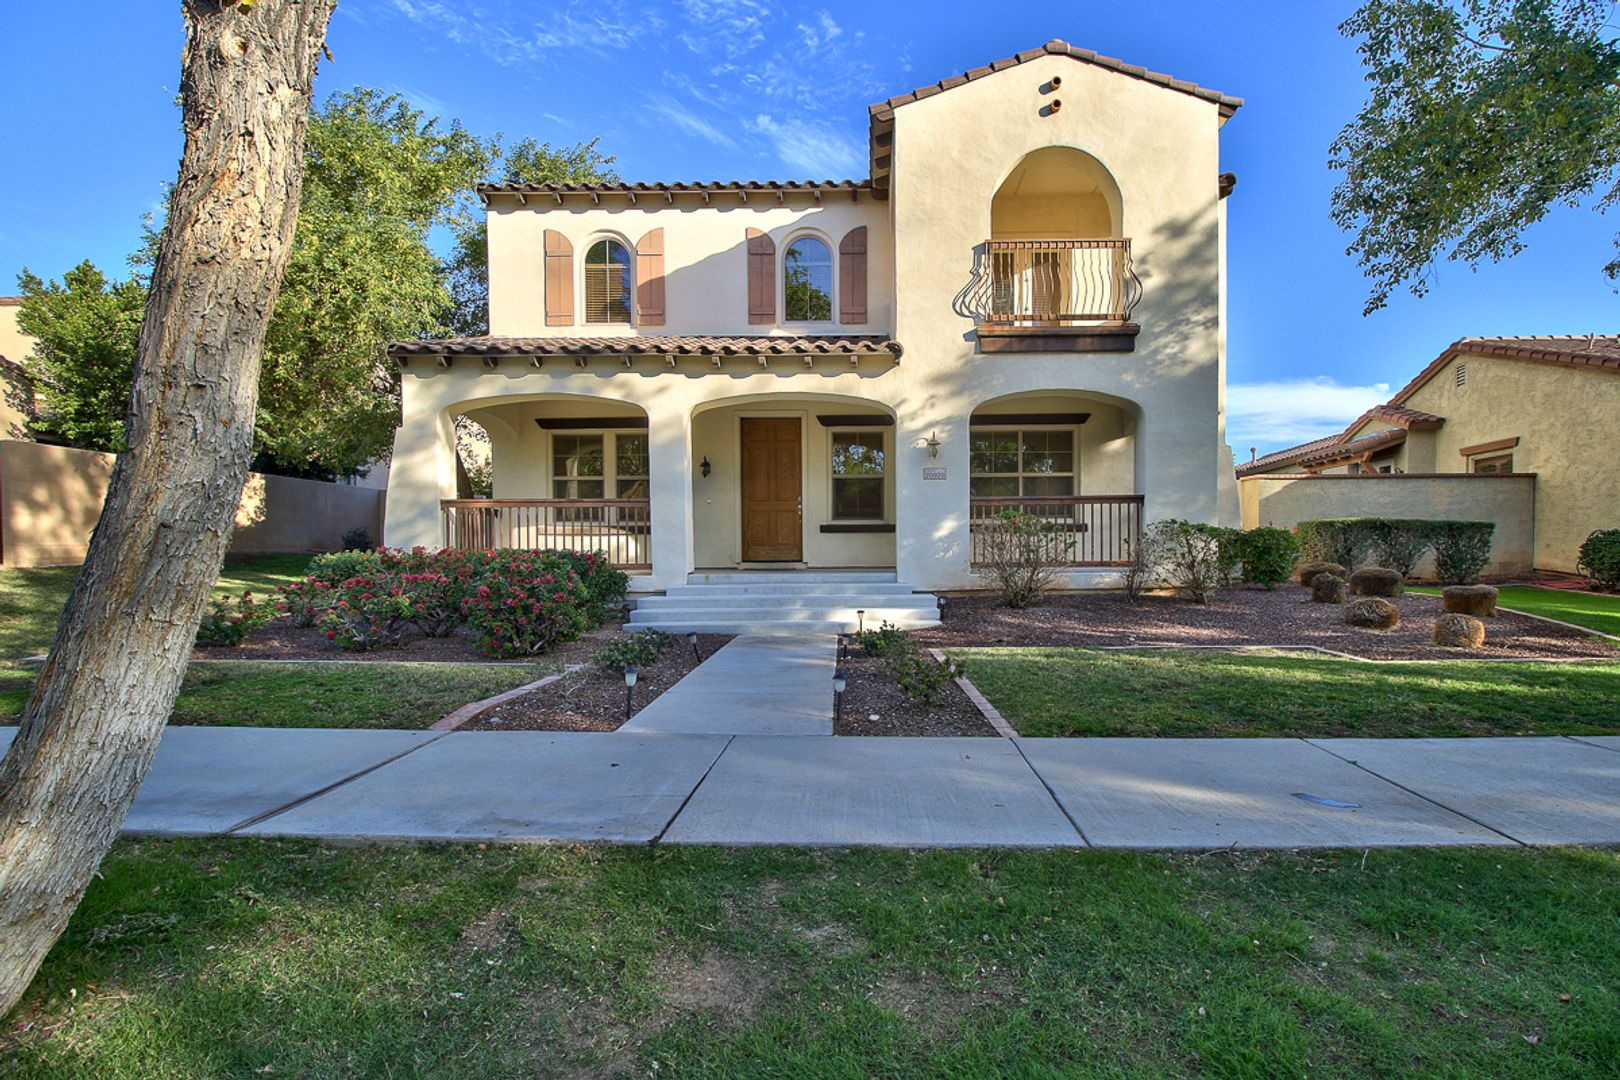 Mission-style home in Main Street District of Verrado